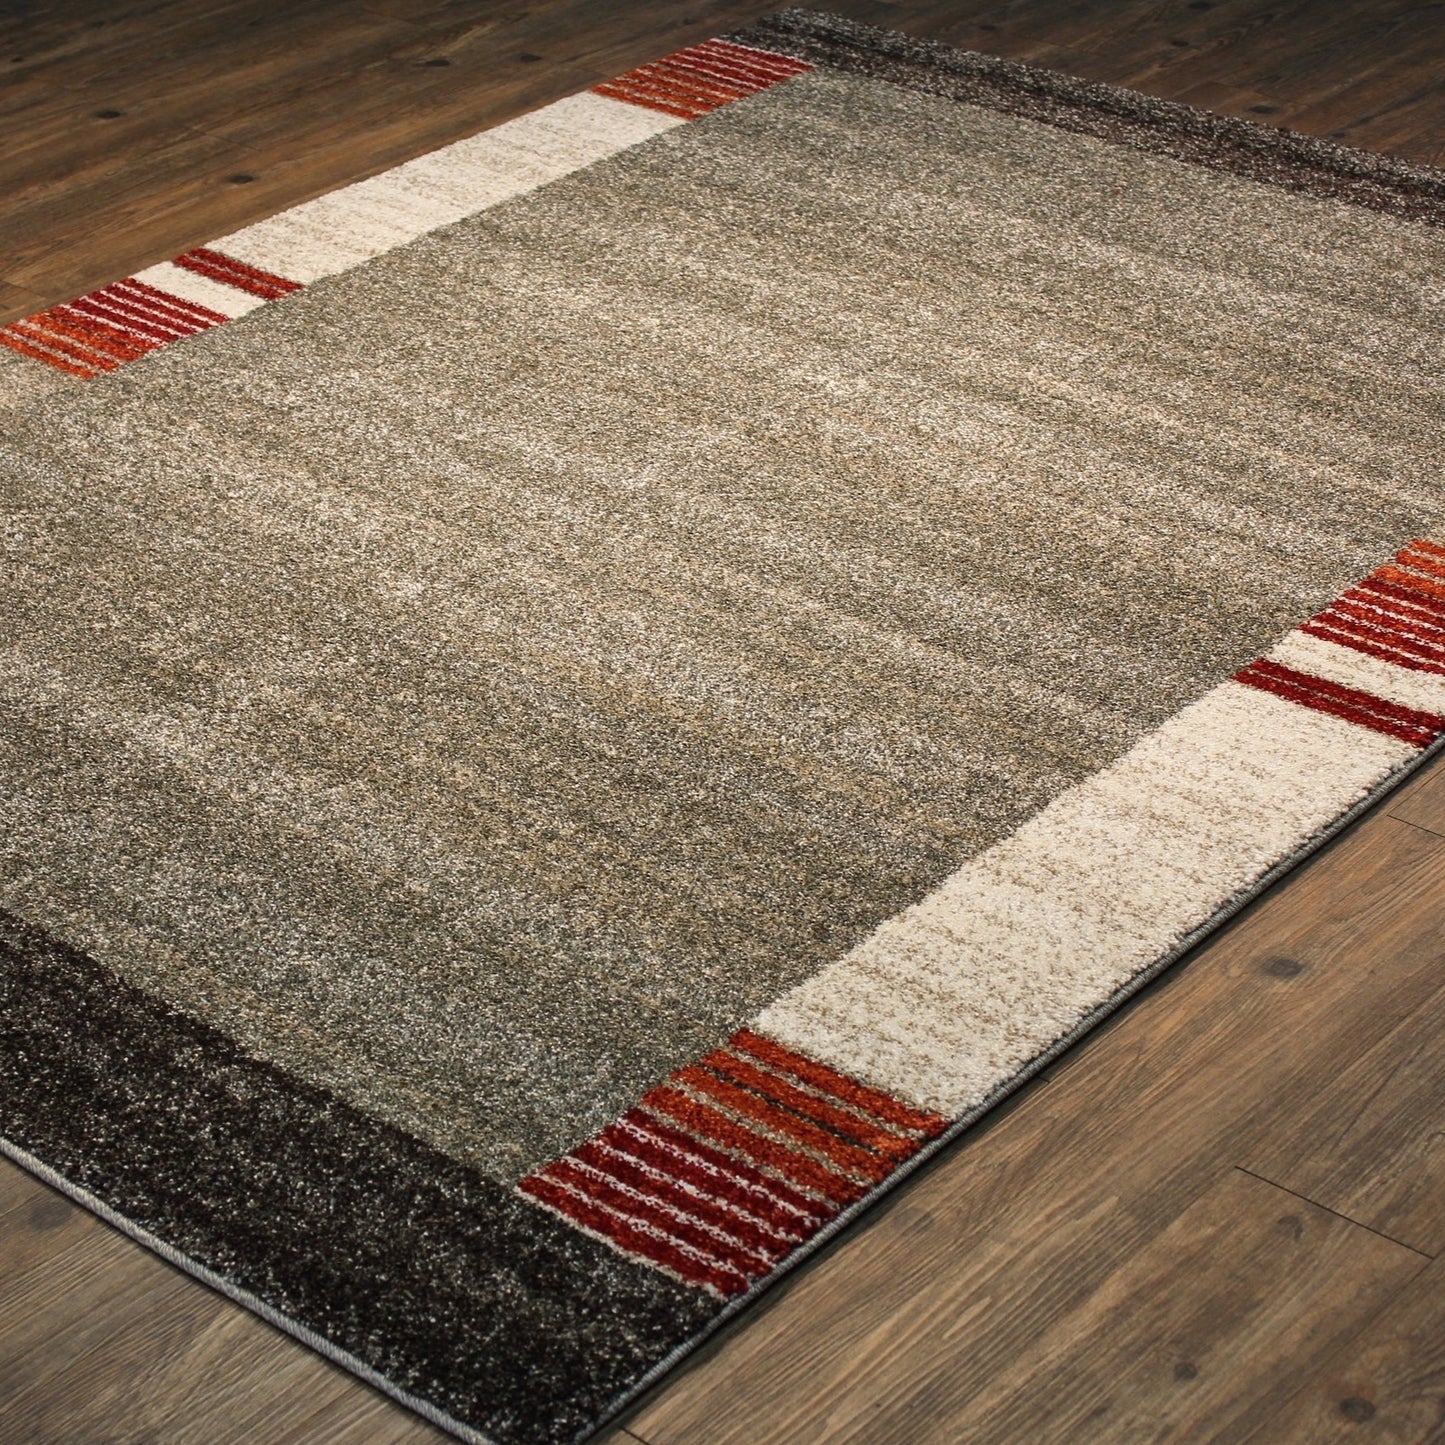 Heavy Durable Plush Appx. 1" Luxury Pile Alonzo AL 211 Area Rug by Rug Factory Plus